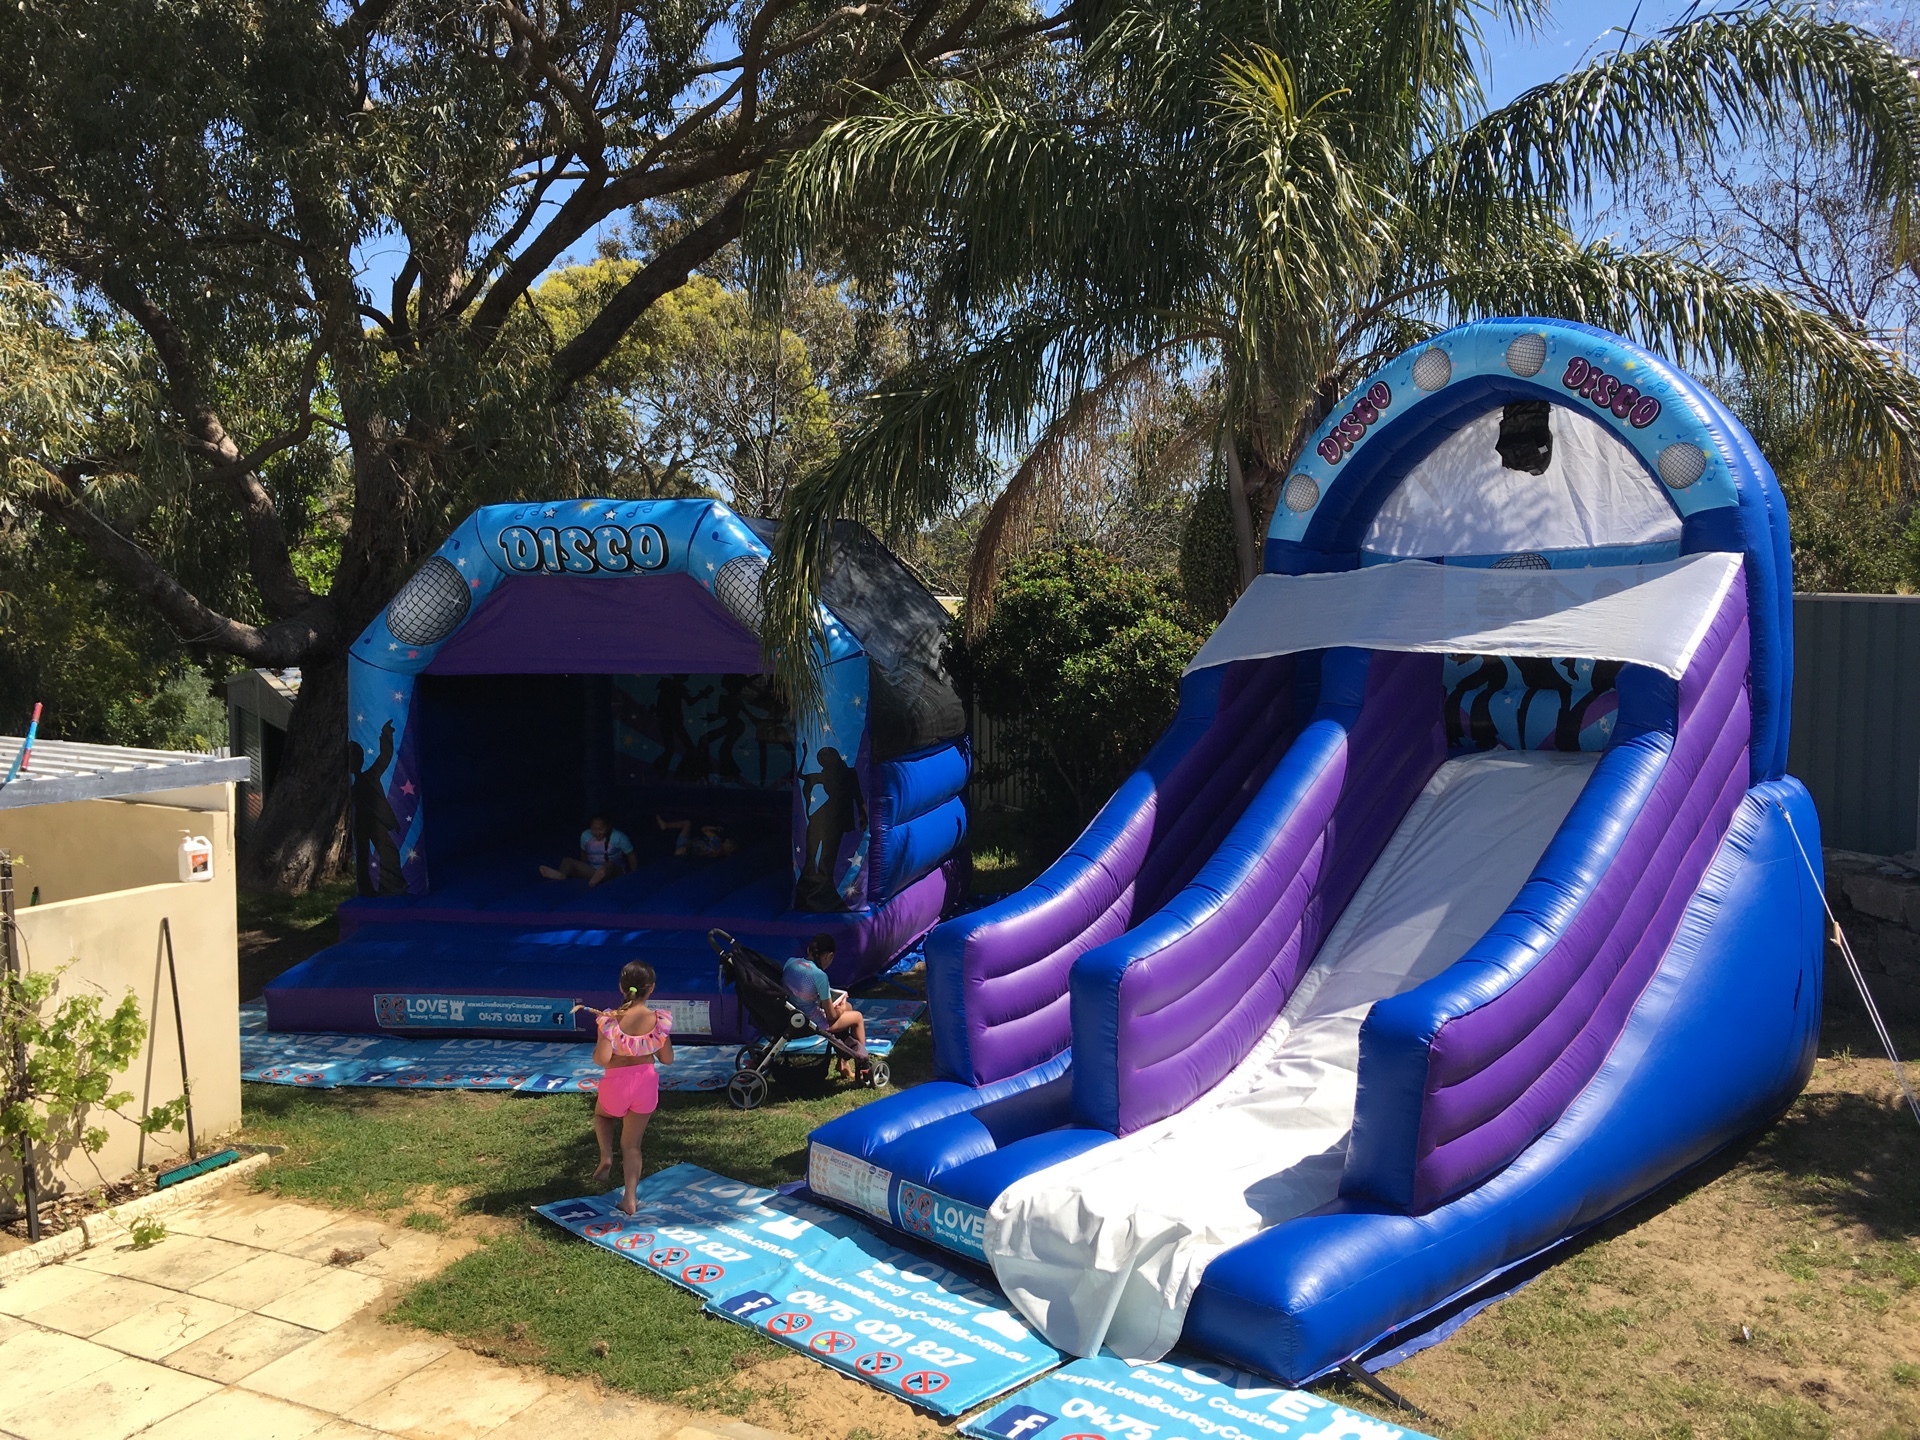 Copy of Double Party Hire. One Large Disco Bouncy Castle And One Inflatable Super Slide Set Up In Perth 